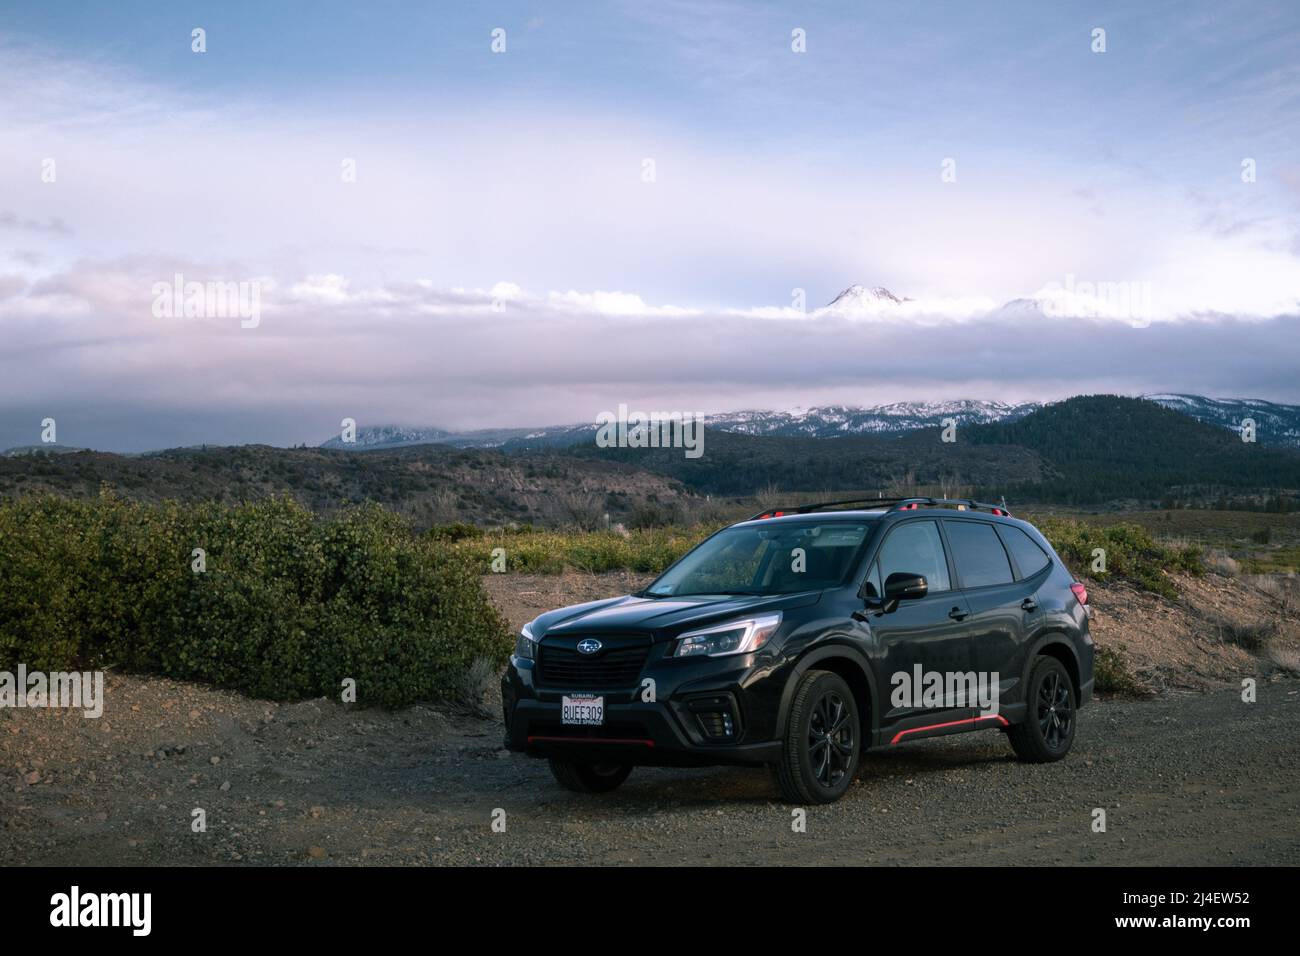 Subaru Forester parked on a dirt road looking toward Mt. Shasta CA Stock Photo